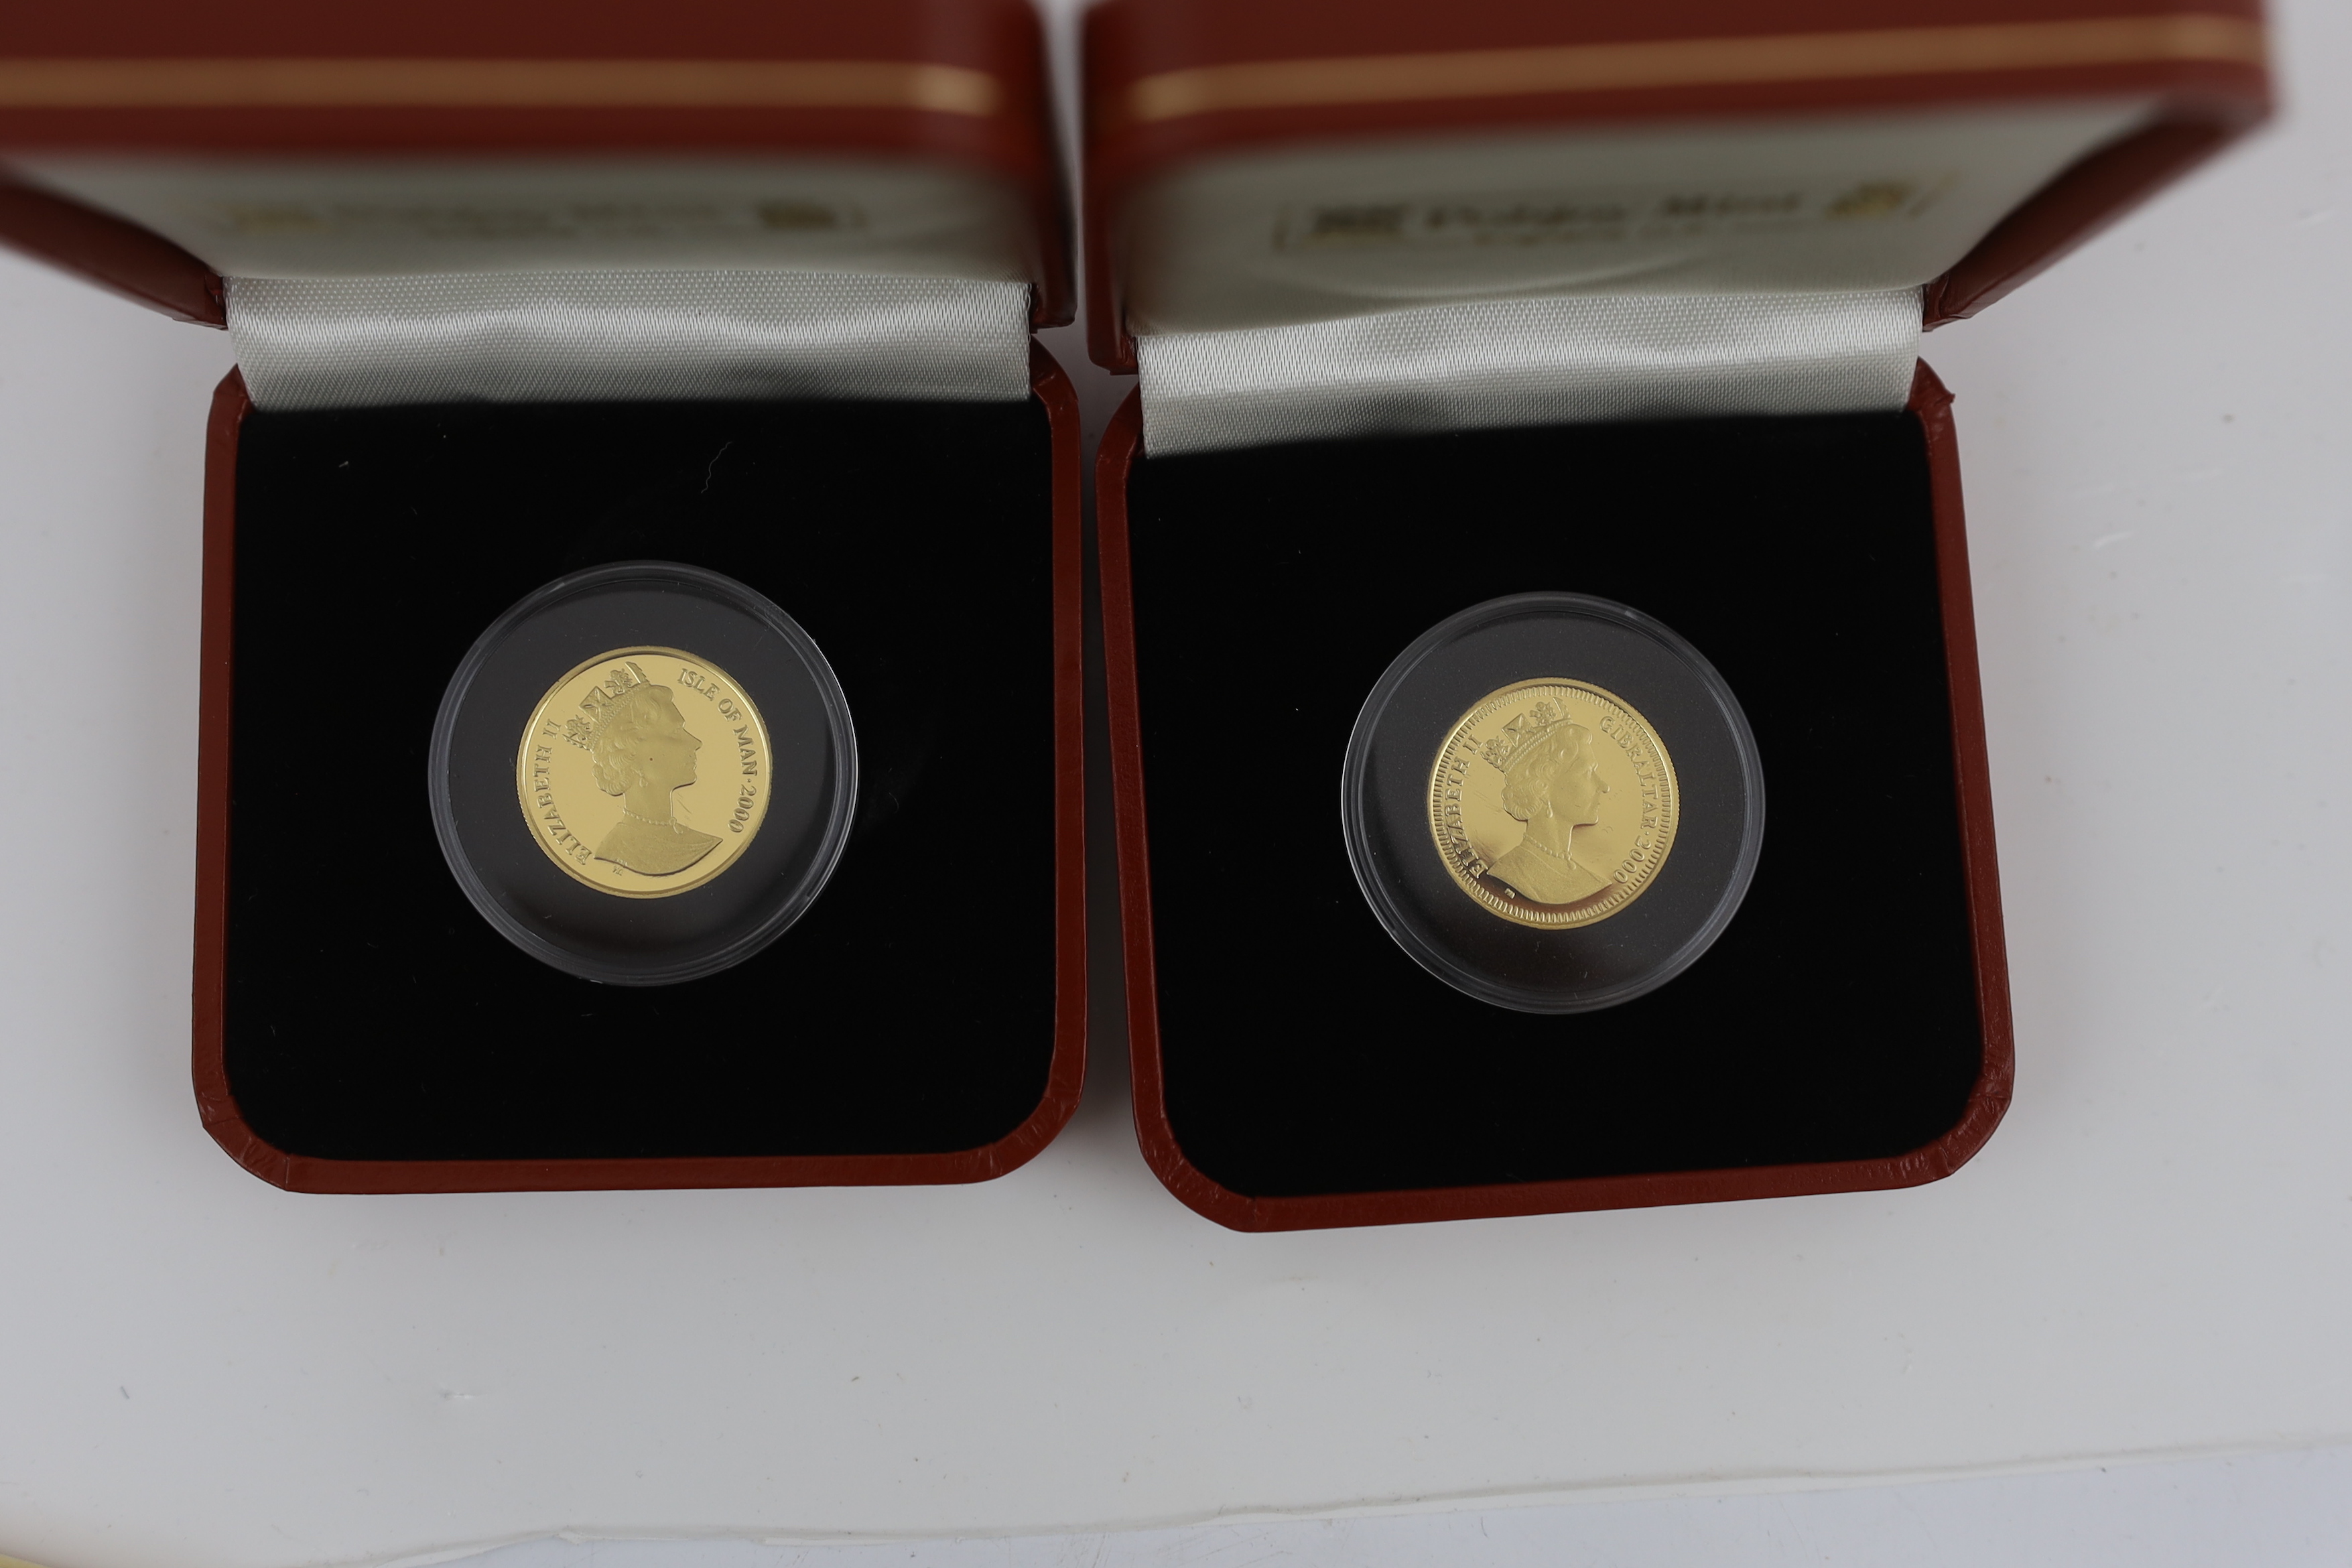 Gold coins - Two Pobjoy mint Isle of Man proof gold 1/5 crown coins, each 6.22g, 999.9/1000 purity